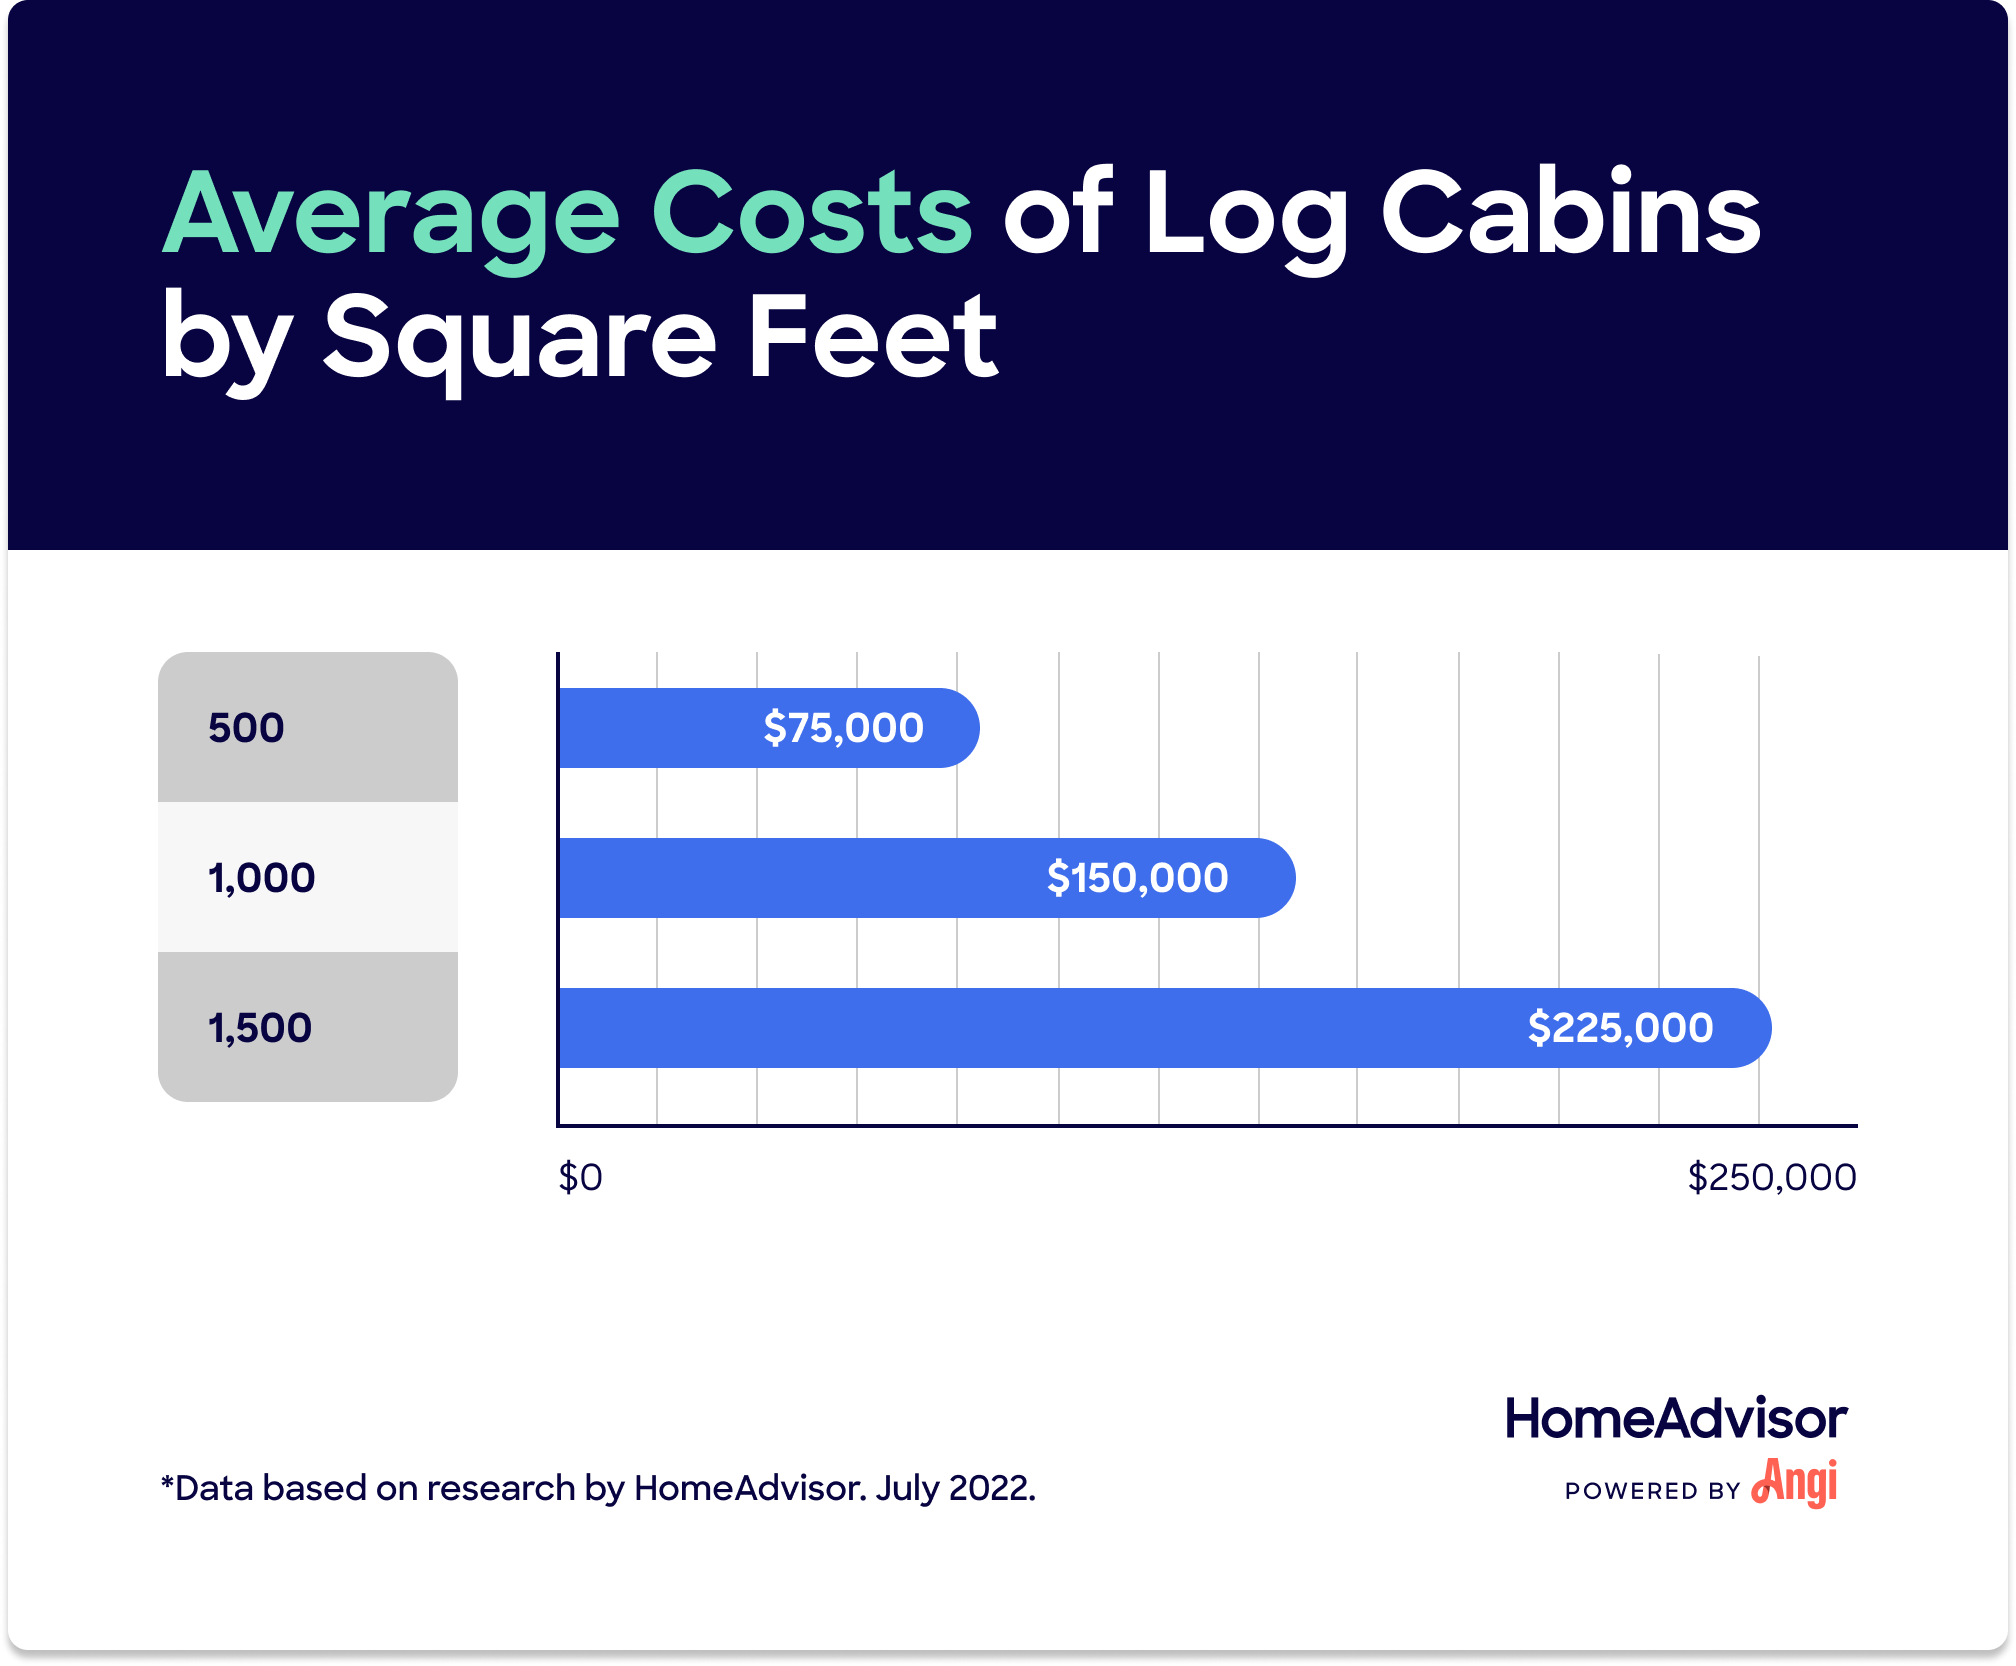 How Much Does It Cost to Build a Log Cabin?